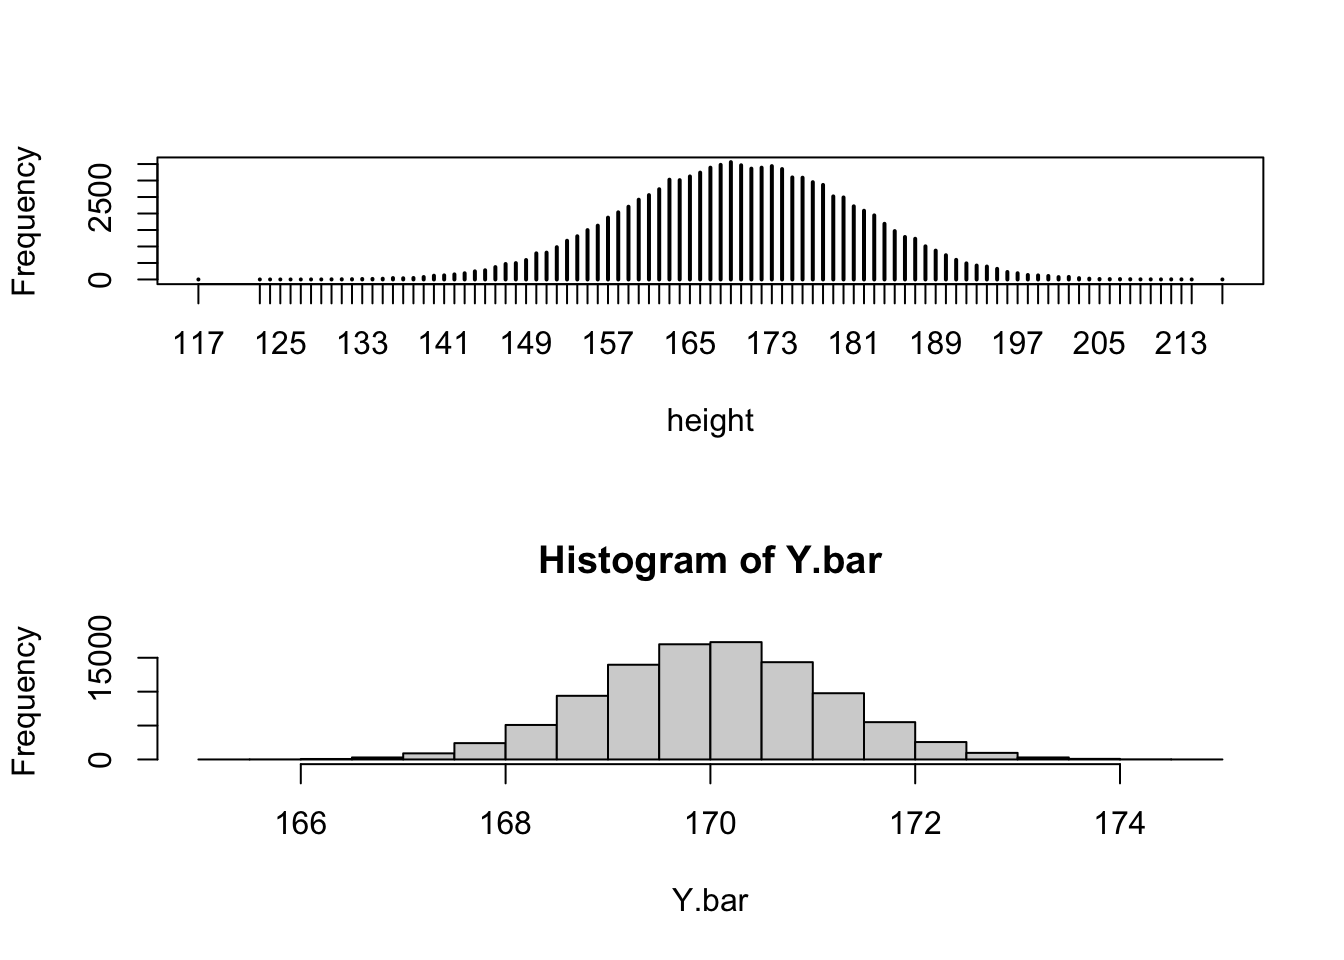 Distribution of Height and the Sampling Distribution of Averages